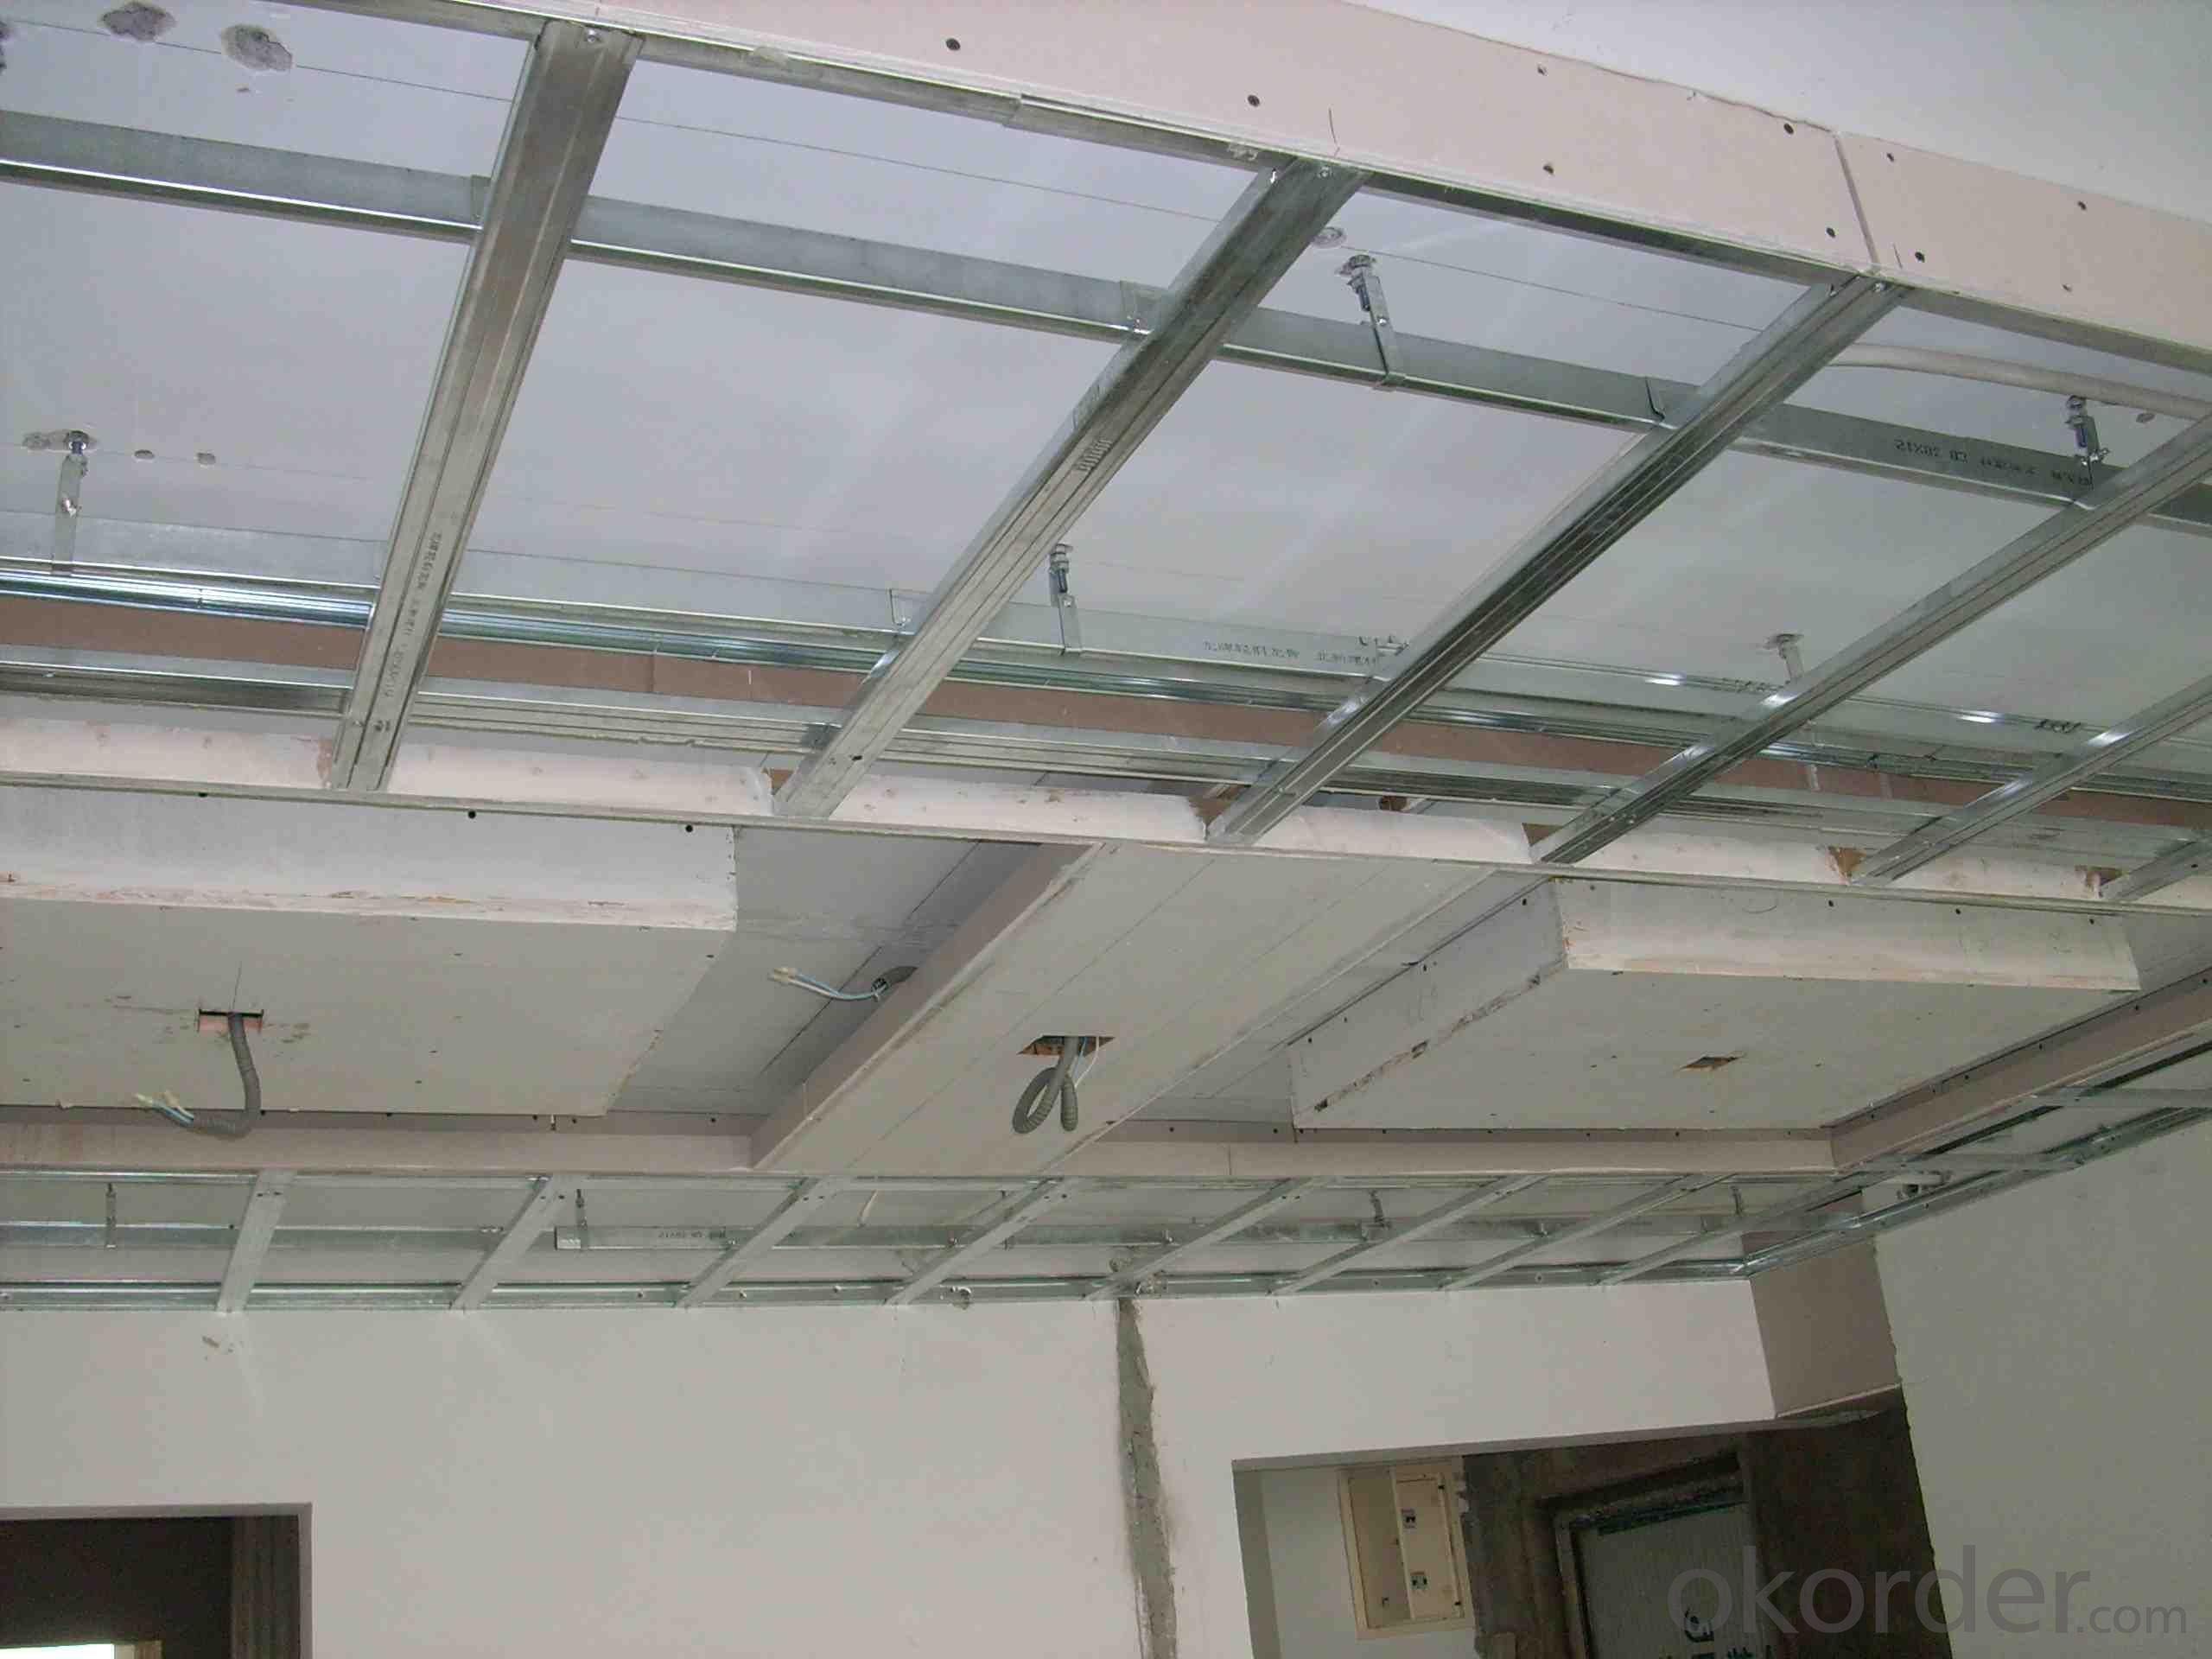 Decorative Material Light Steel Keel For Gypsum Ceiling